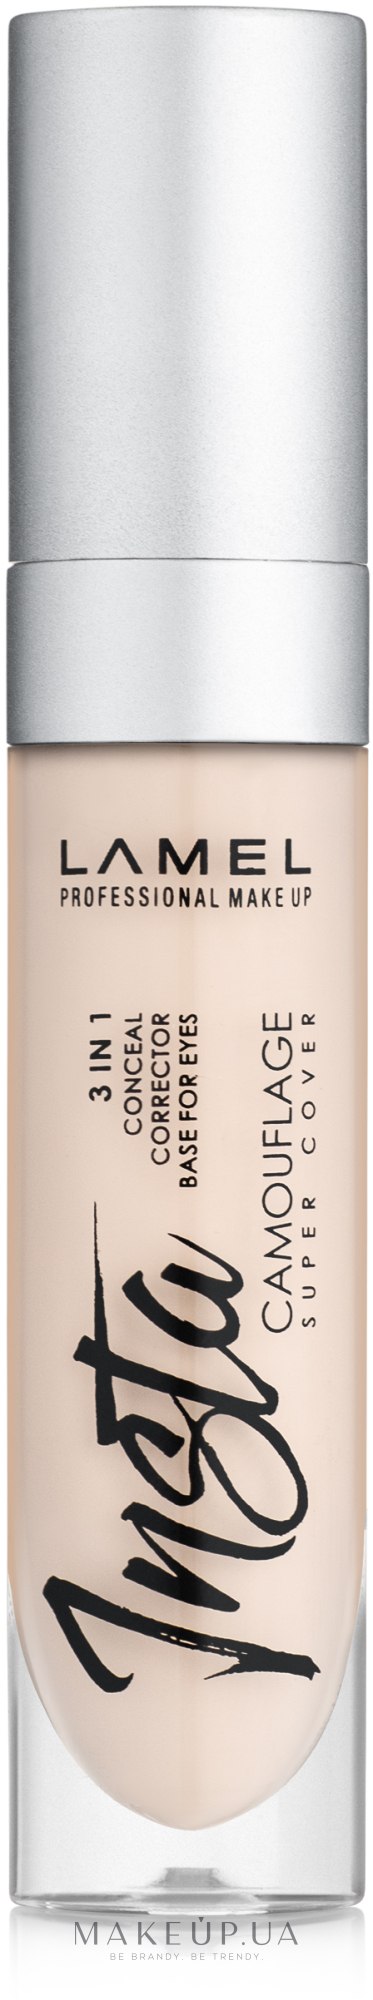 LAMEL Make Up Insta Camouflage Conceal 3in1